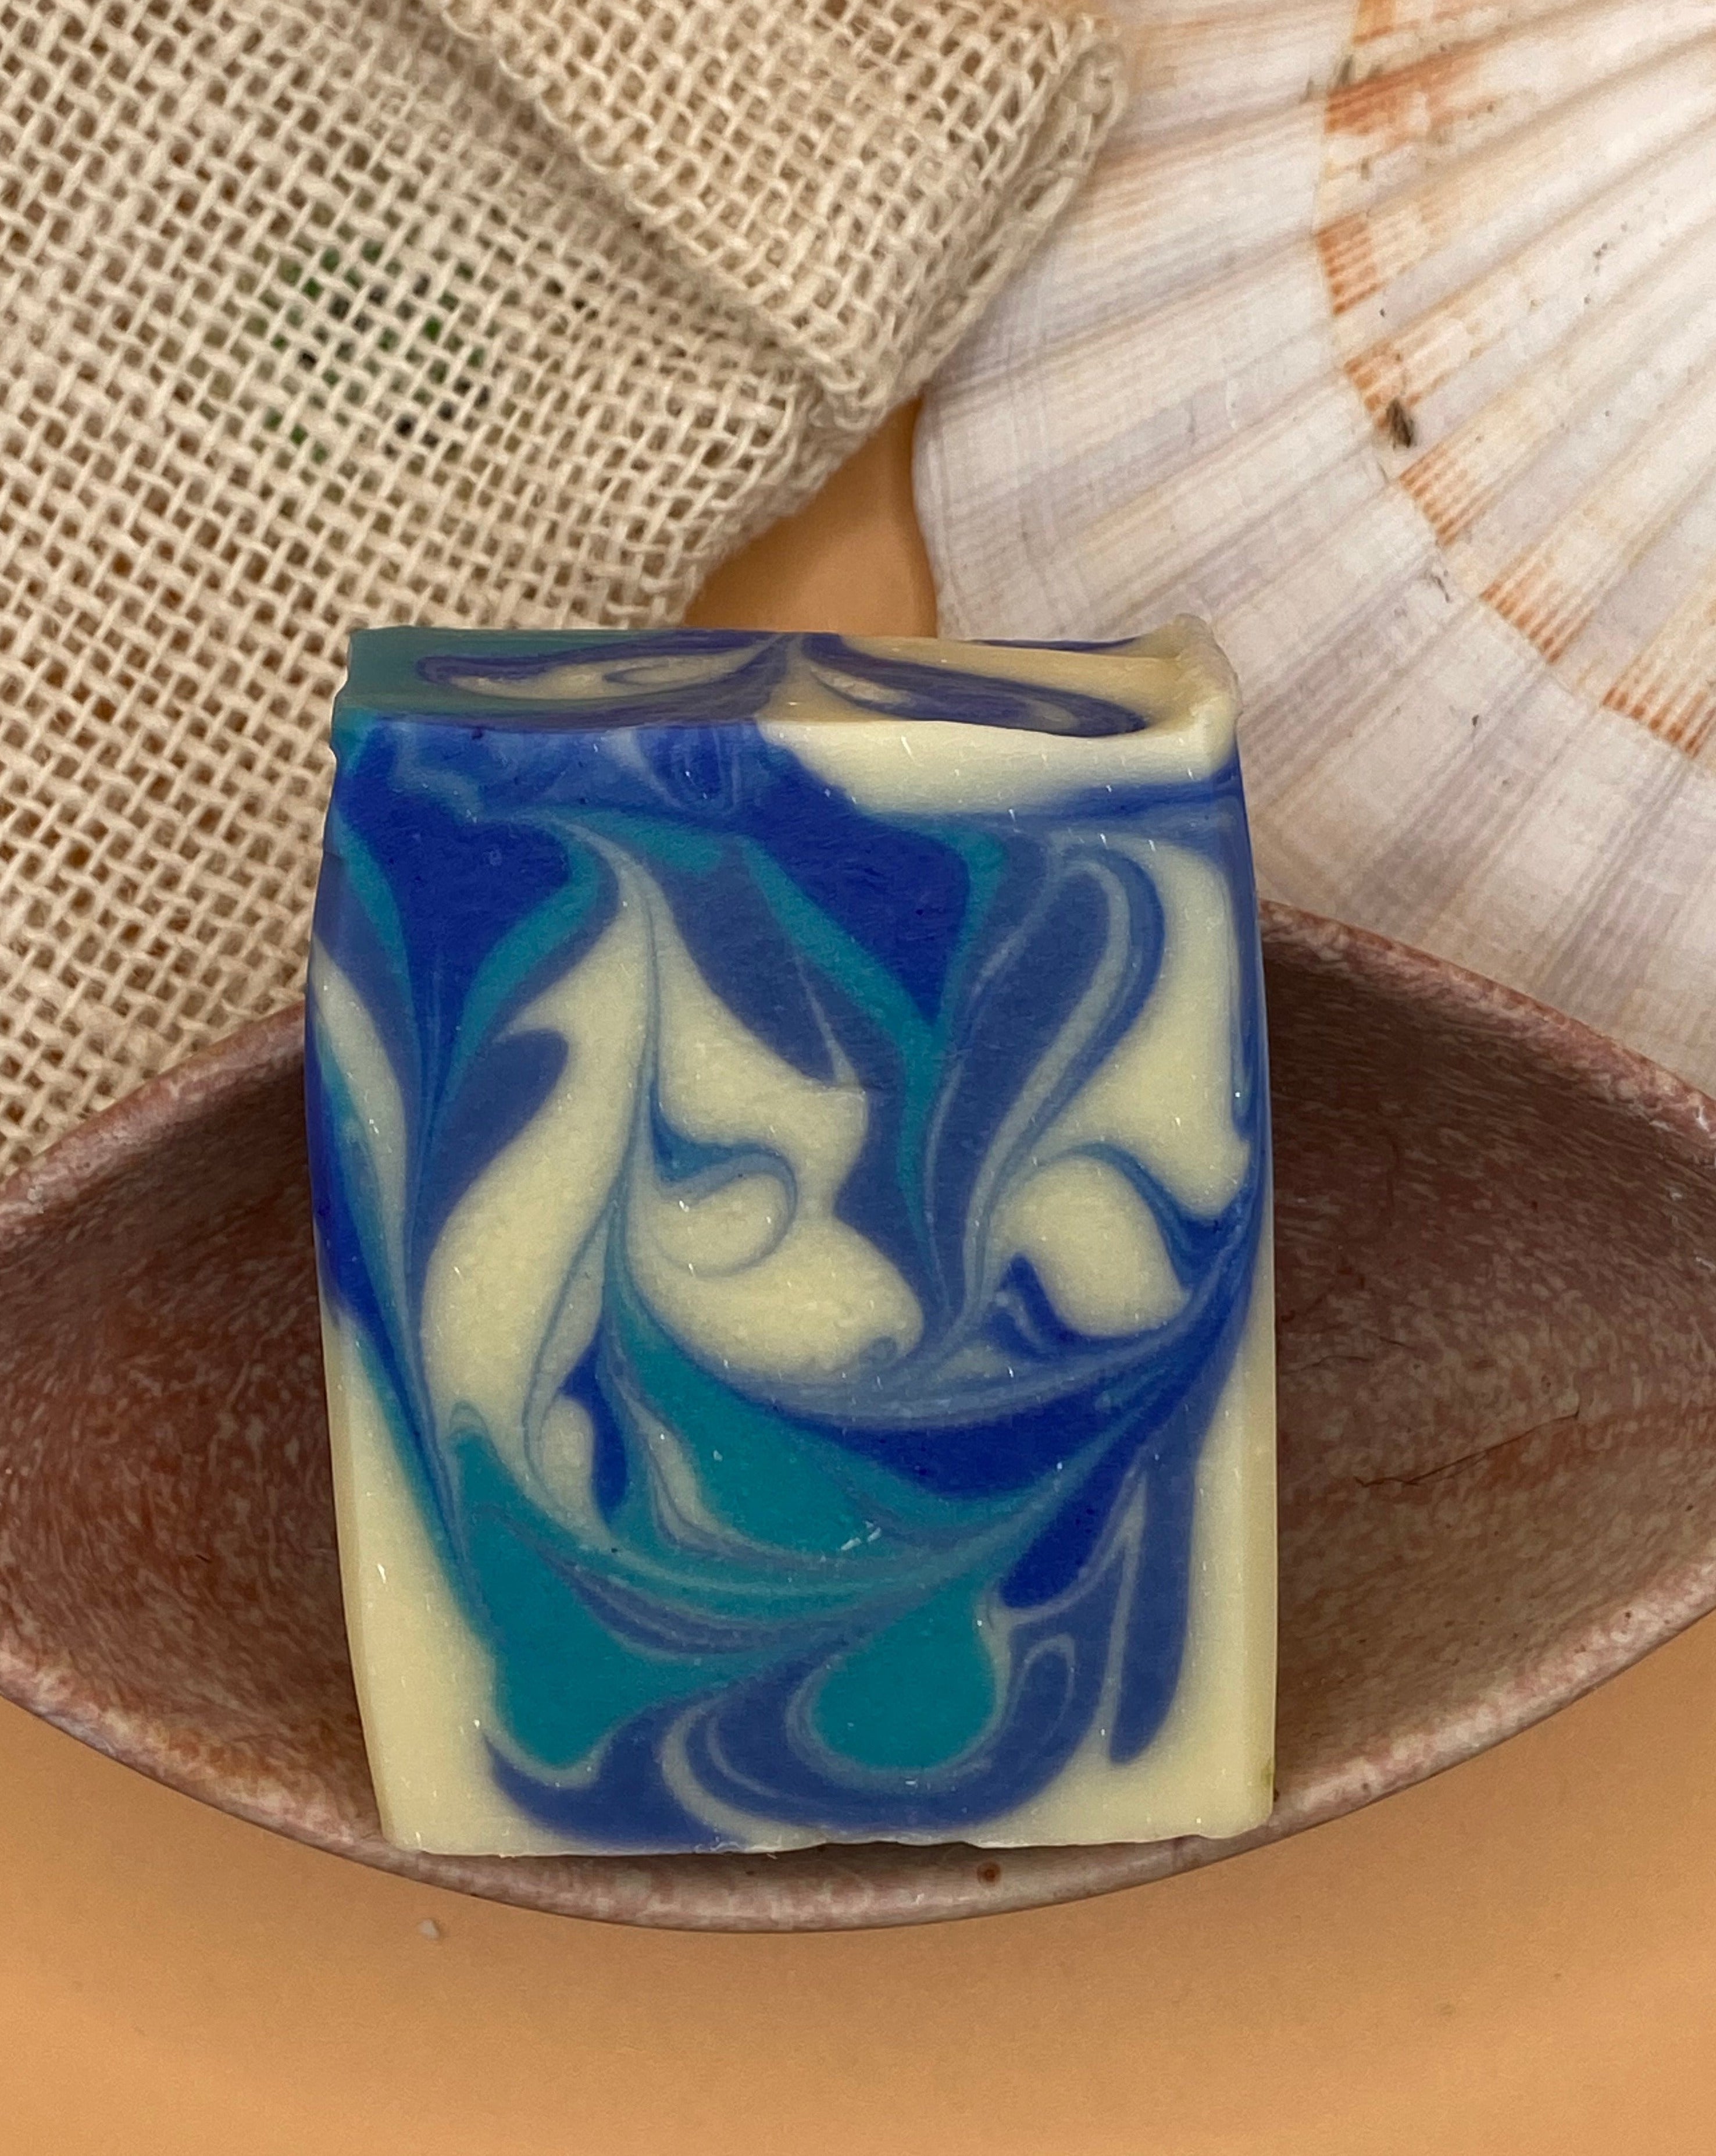 The Triology Gift Soap Set: Gone to the beach soap